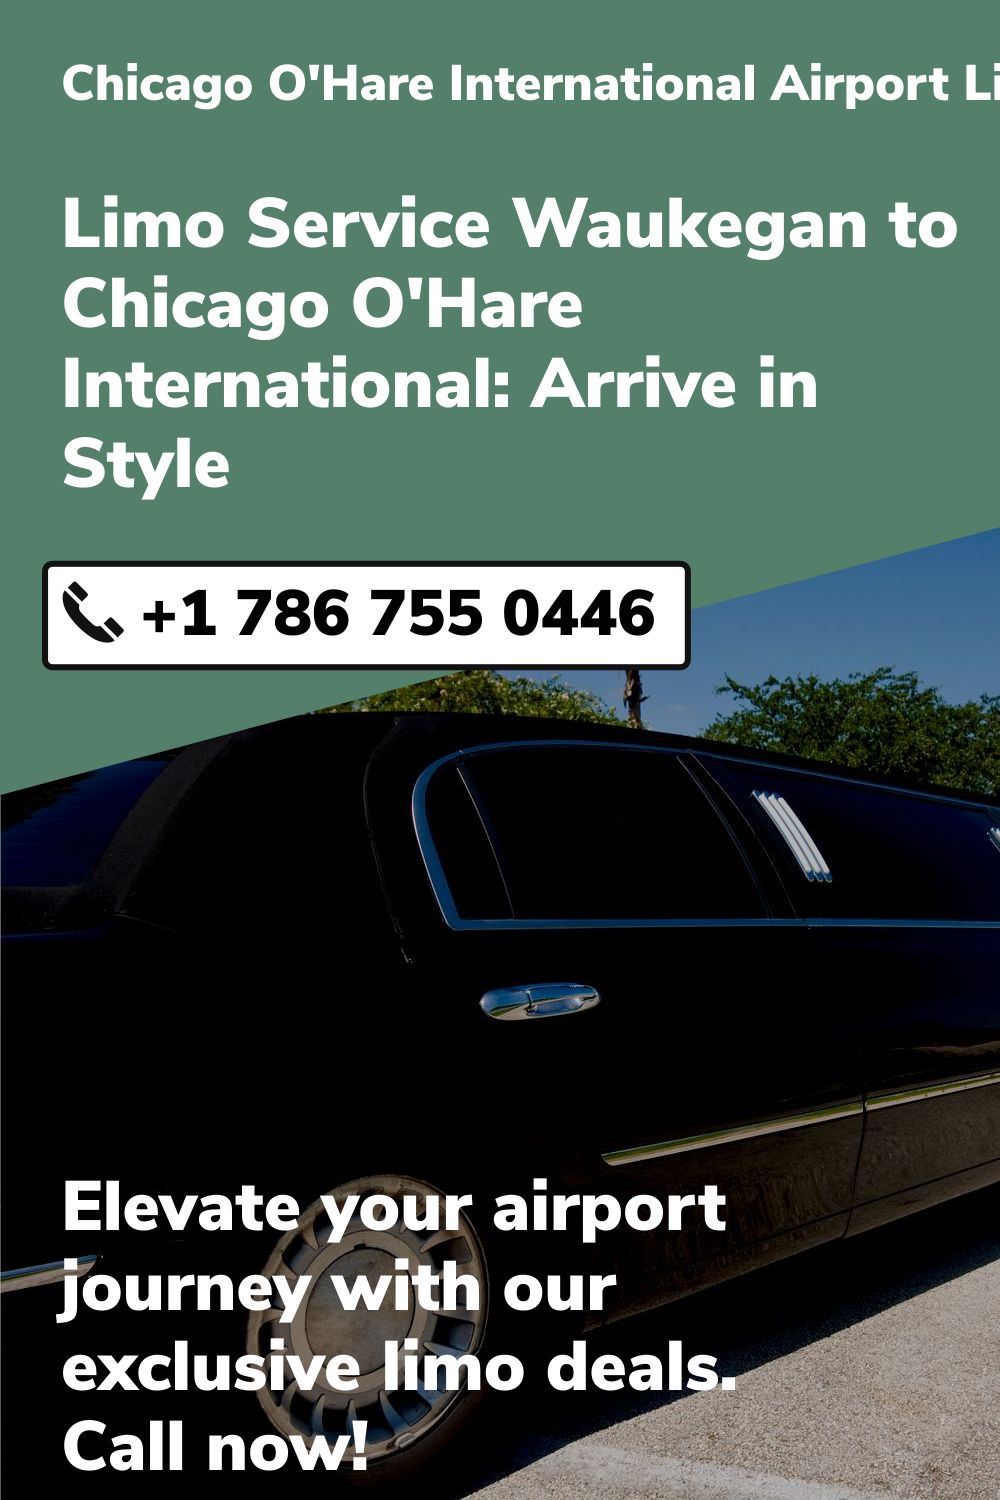 Chicago O'Hare International Airport Limo